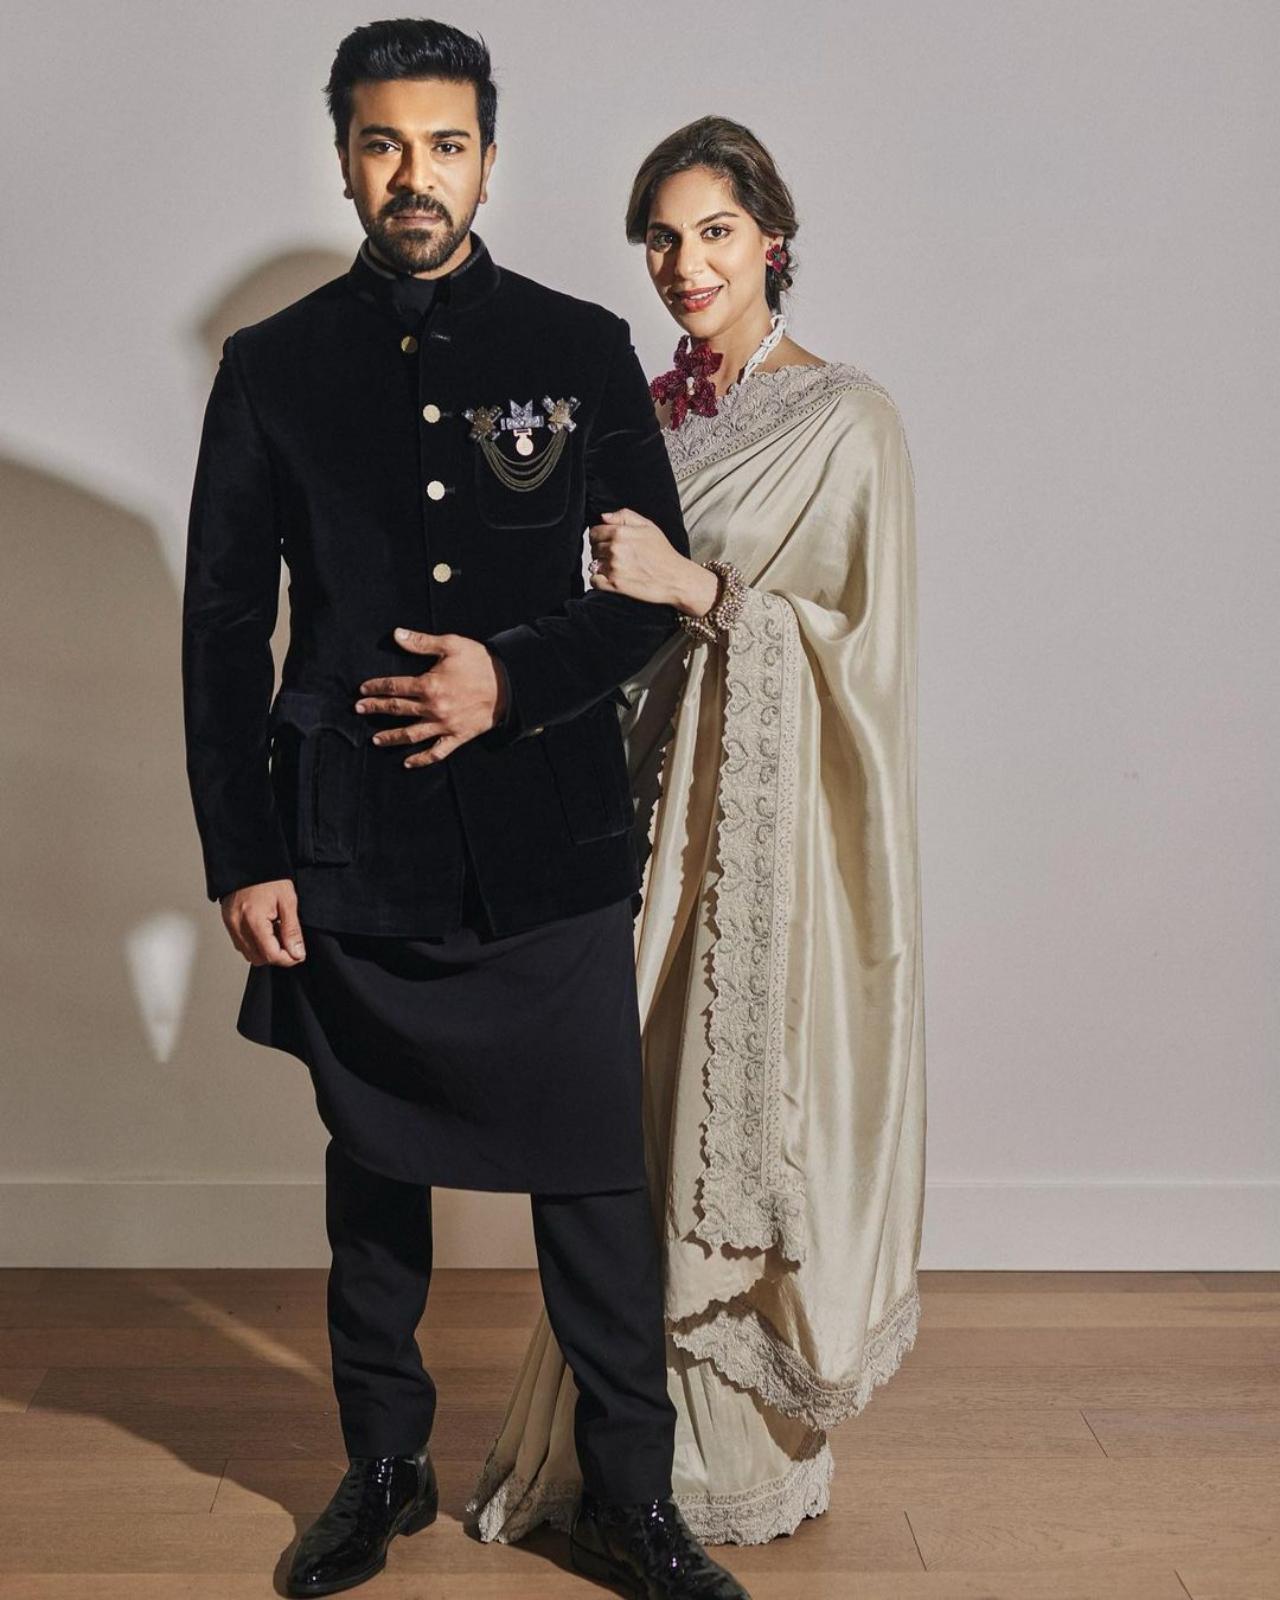 The event also had Upasana Kamineni Konidela in attendance with her husband Ram Charan to support and cheer Team RRR's nomination in the Oscars. She was elegantly attired in sustainable customised ivory silk saree made using hand woven silk, of spun fabric, created from recycled scraps, designed by Hyderabad-based designer, Jayanti Reddy.